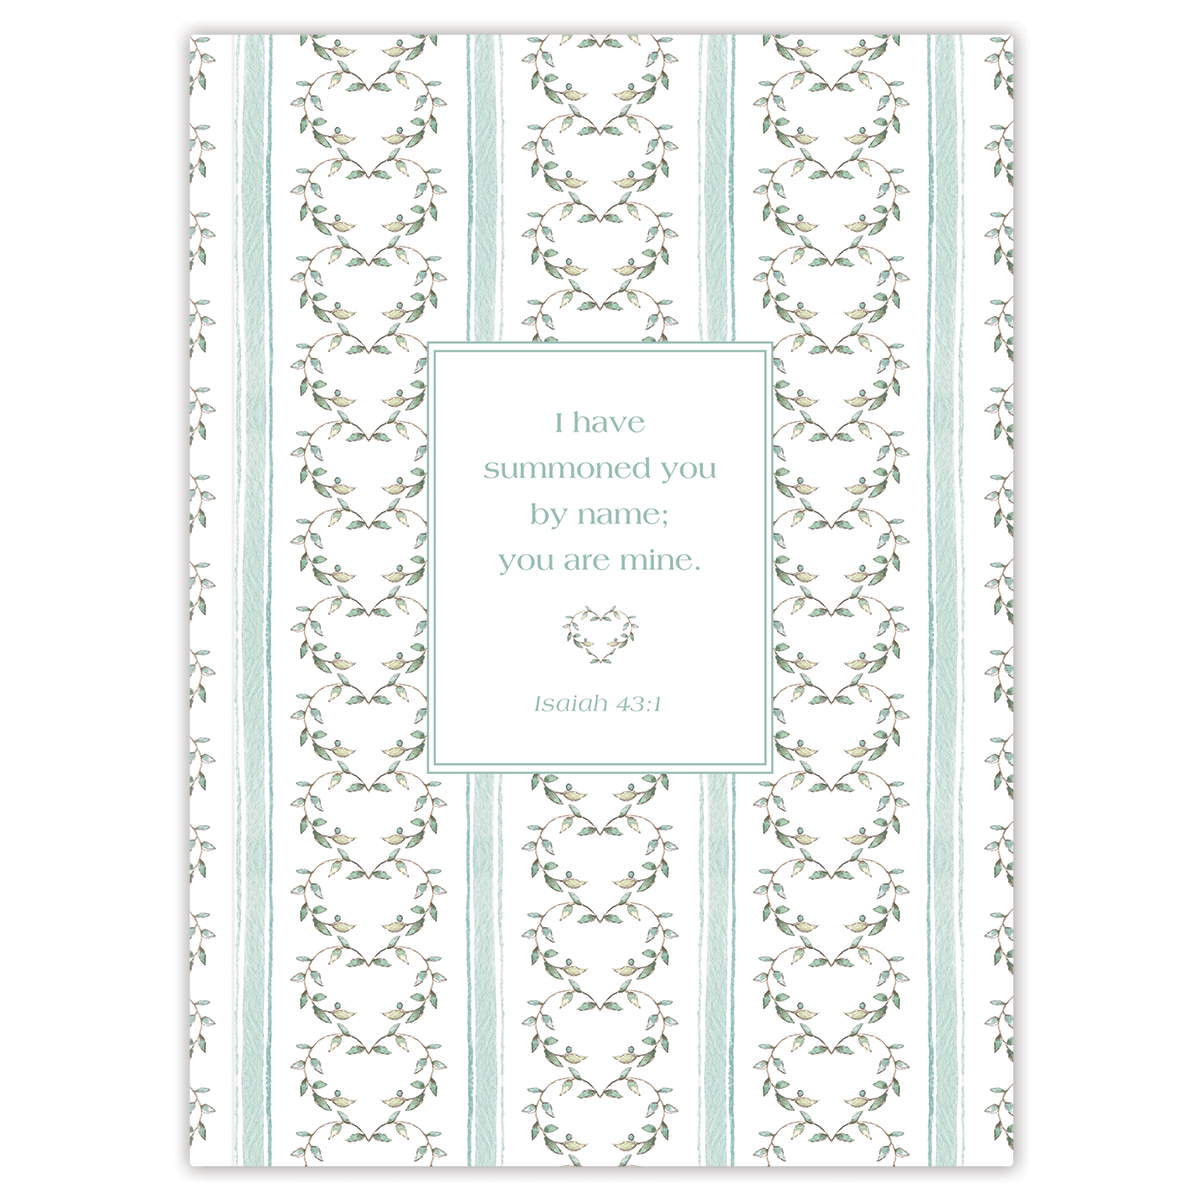 Hearts & Vines by Lydia Carraway